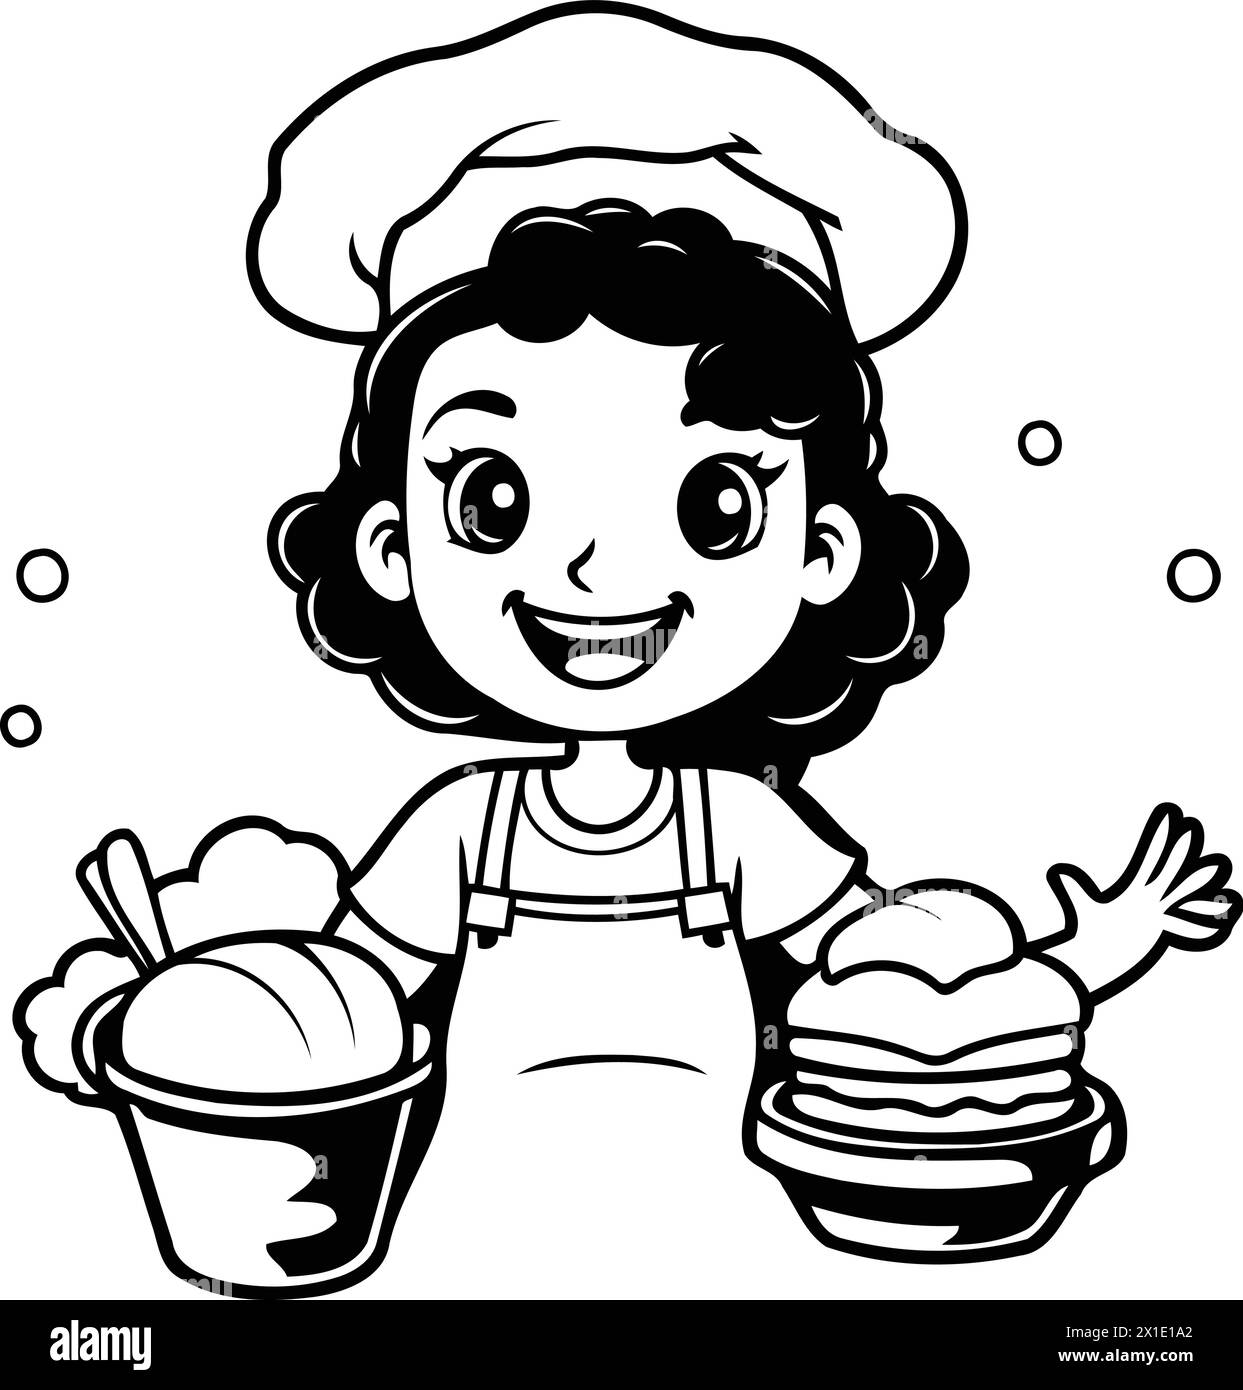 Cute little girl chef in uniform and hat. Vector illustration. Stock Vector